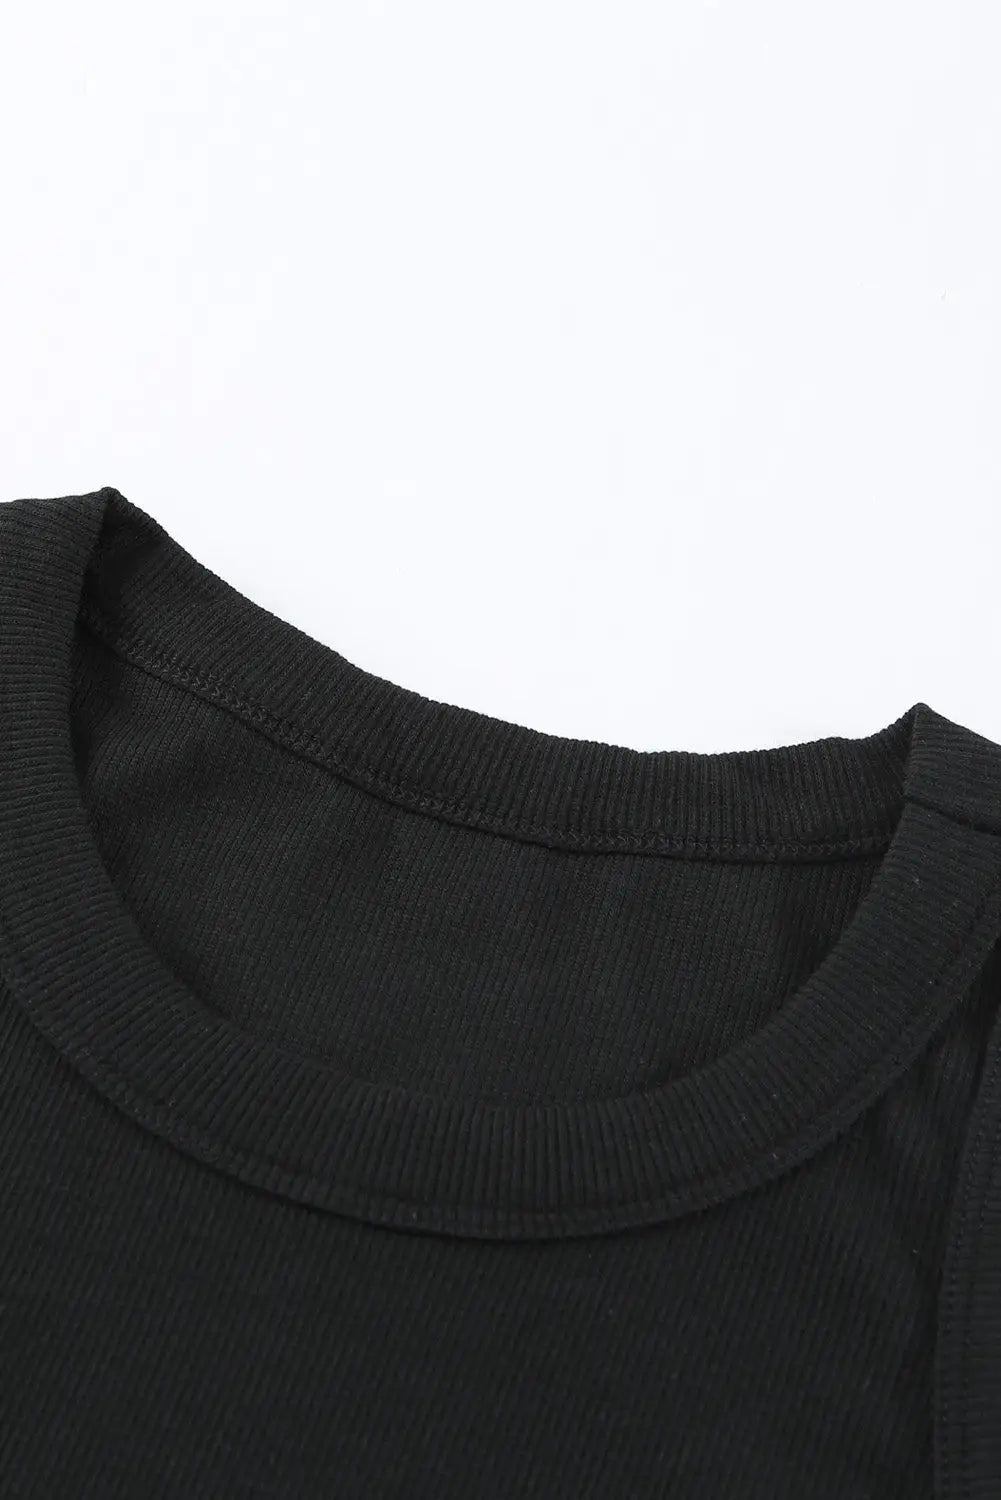 Solid black round neck ribbed tank top - tops